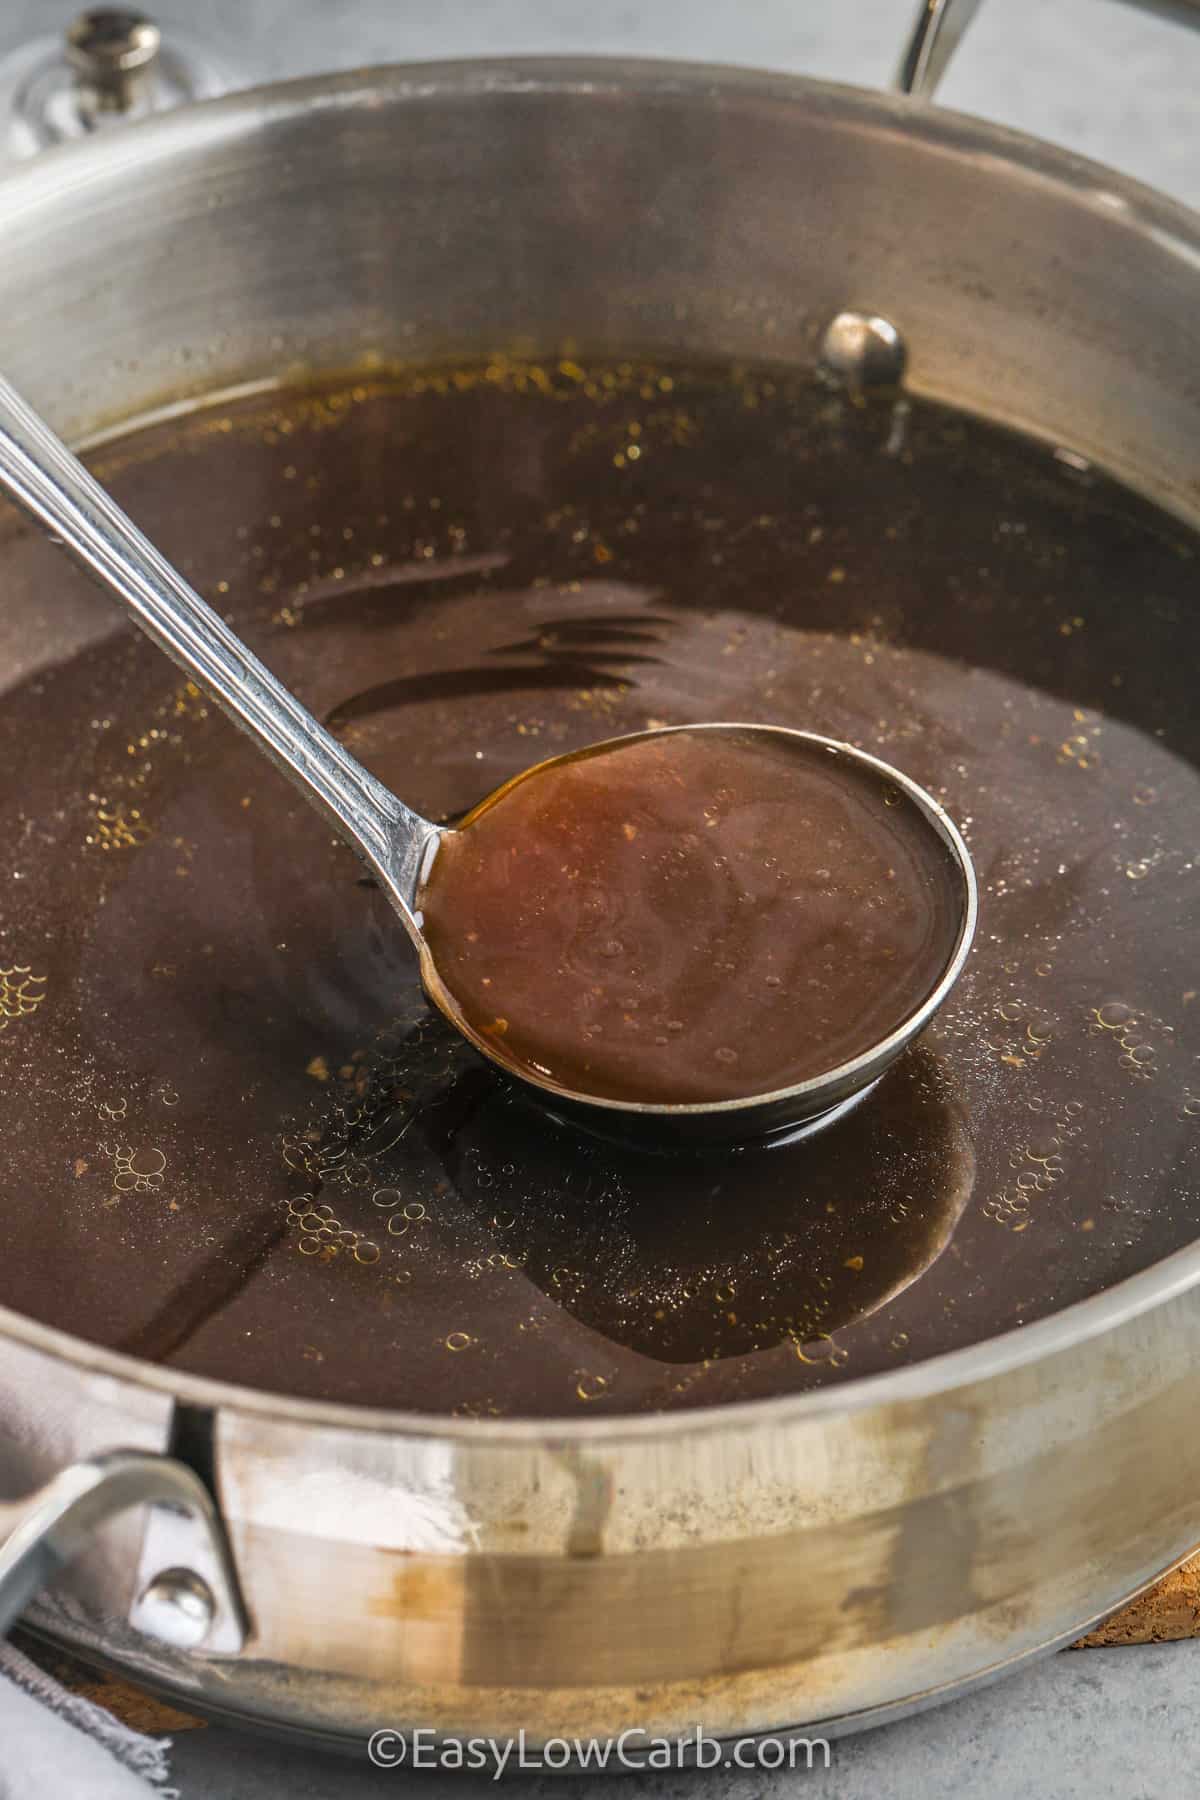 beef bone broth recipe in a pan, with a silver ladle scooping some broth out